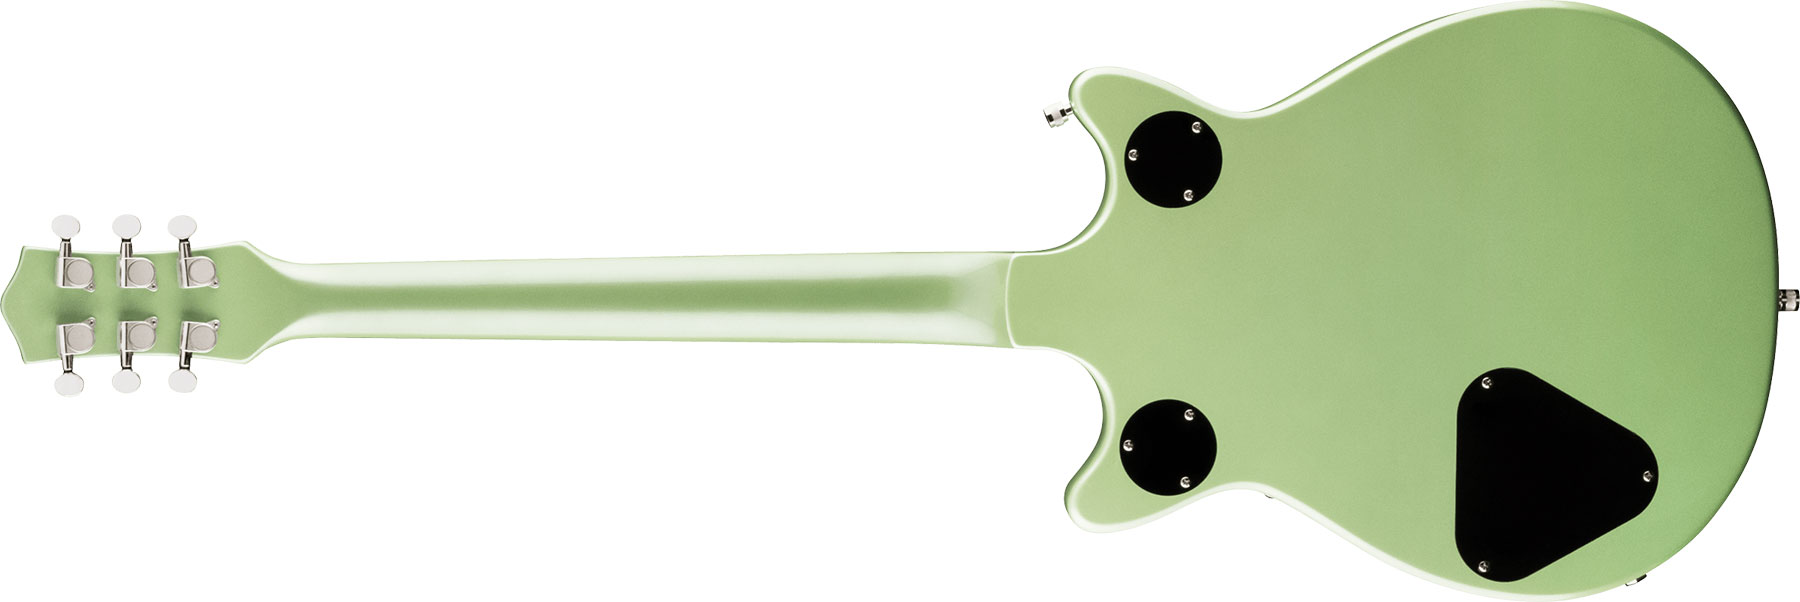 Gretsch G5232t Electromatic Double Jet Ft Hh Bigsby Lau - Broadway Jade - Double cut electric guitar - Variation 1